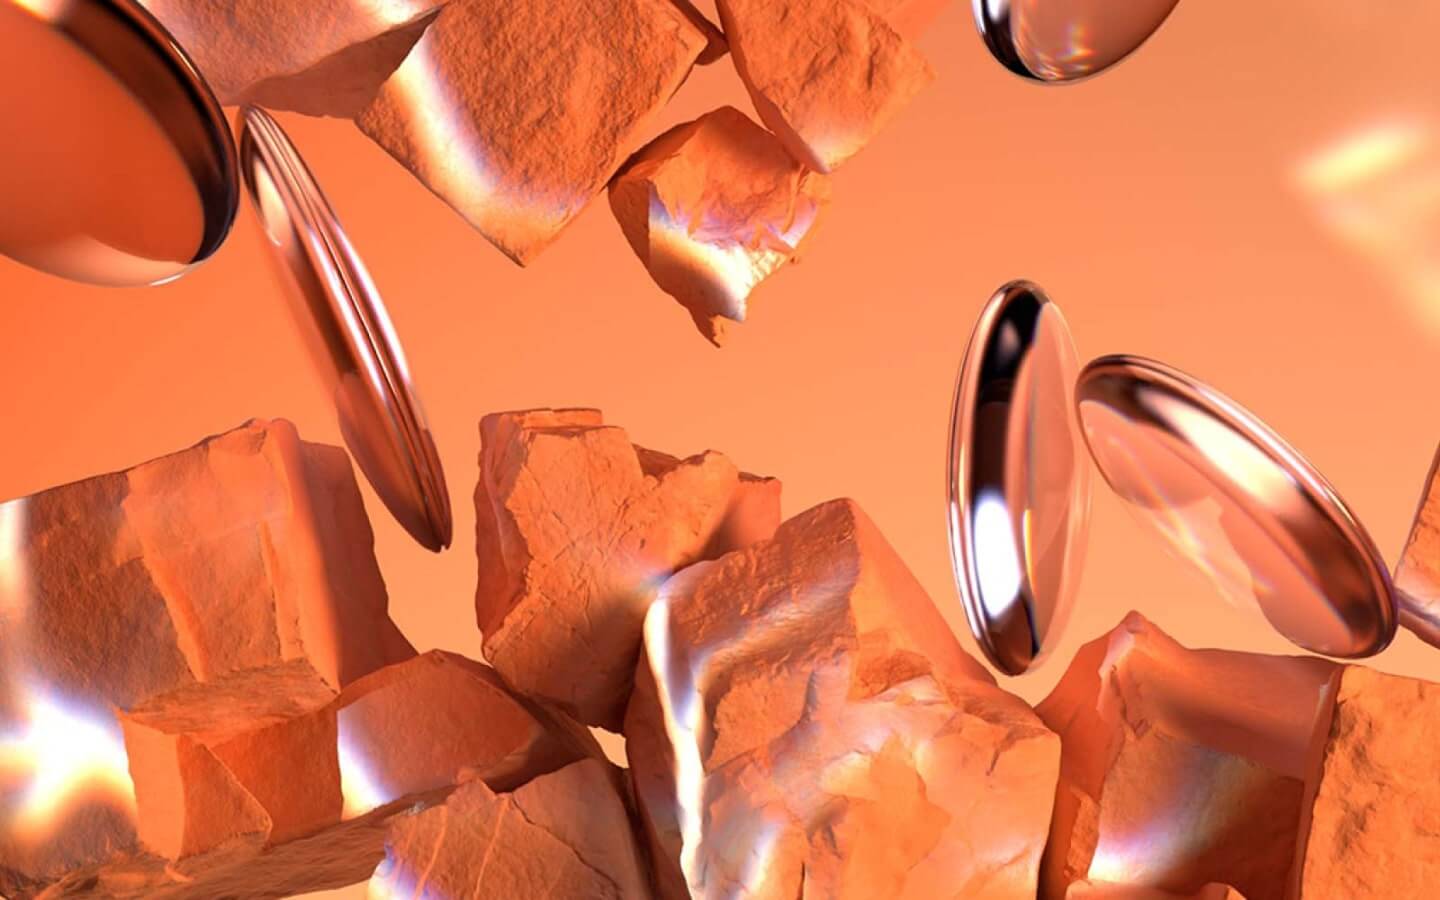 Abstract image with reflective silver droplets floating among terracotta-colored rock fragments against an orange-toned background.